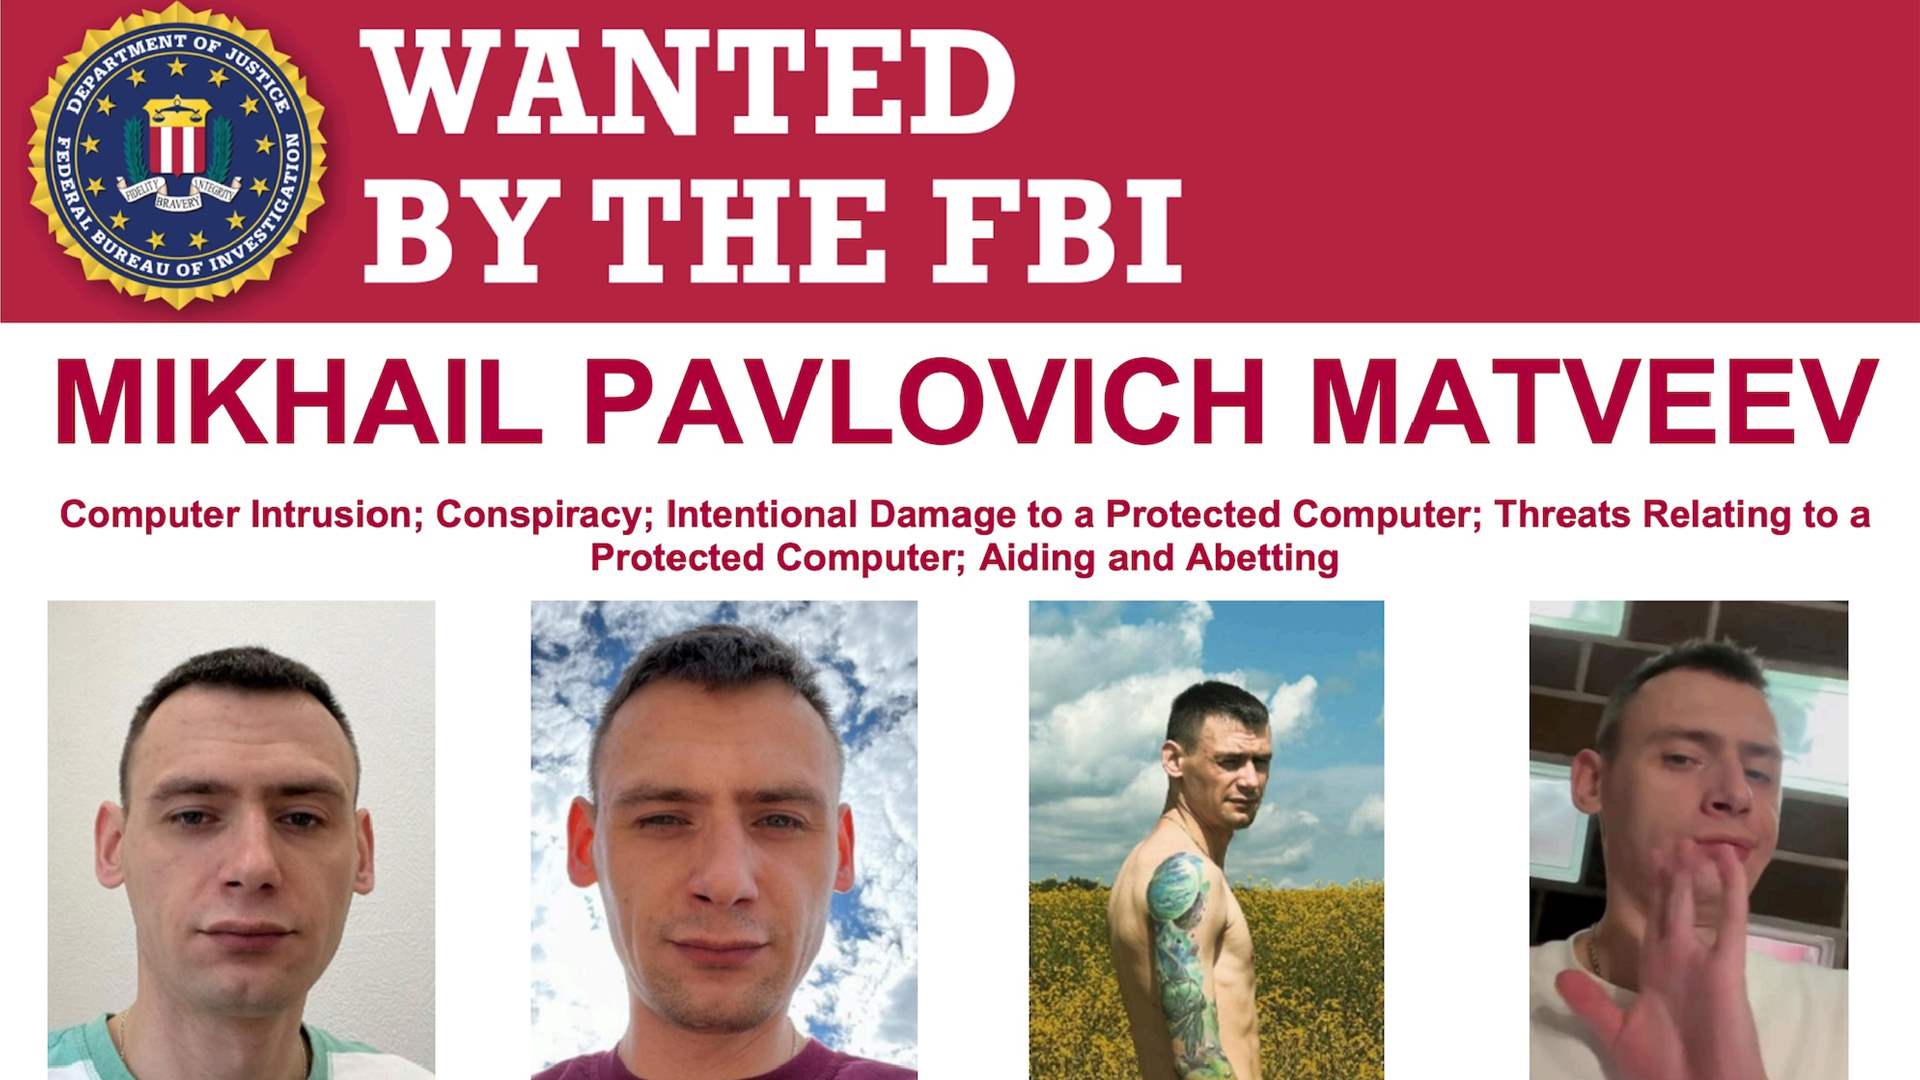 One of the FBI’s most wanted hackers is trolling the US government